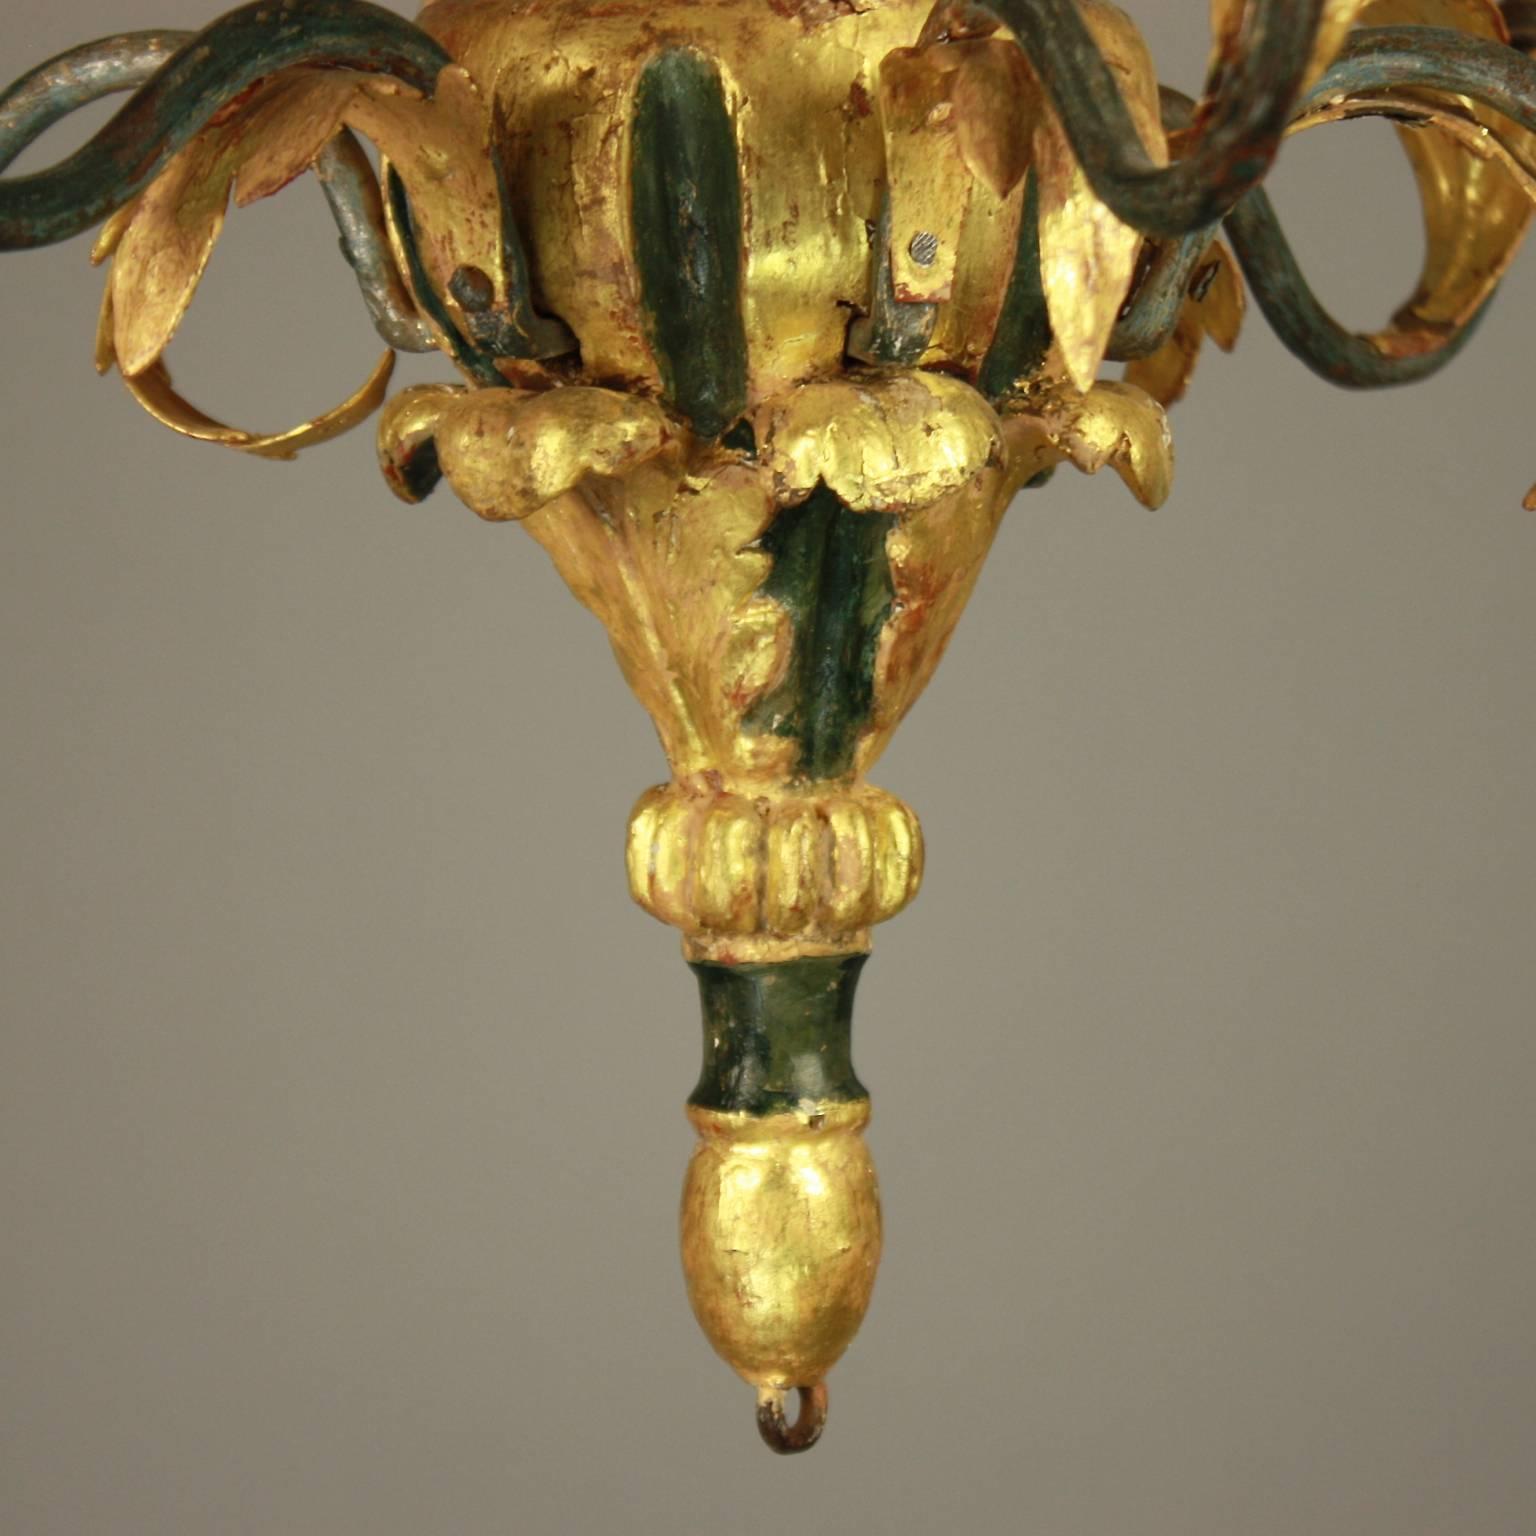 Small Italian Painted and Carved Giltwood Chandelier (18. Jahrhundert)